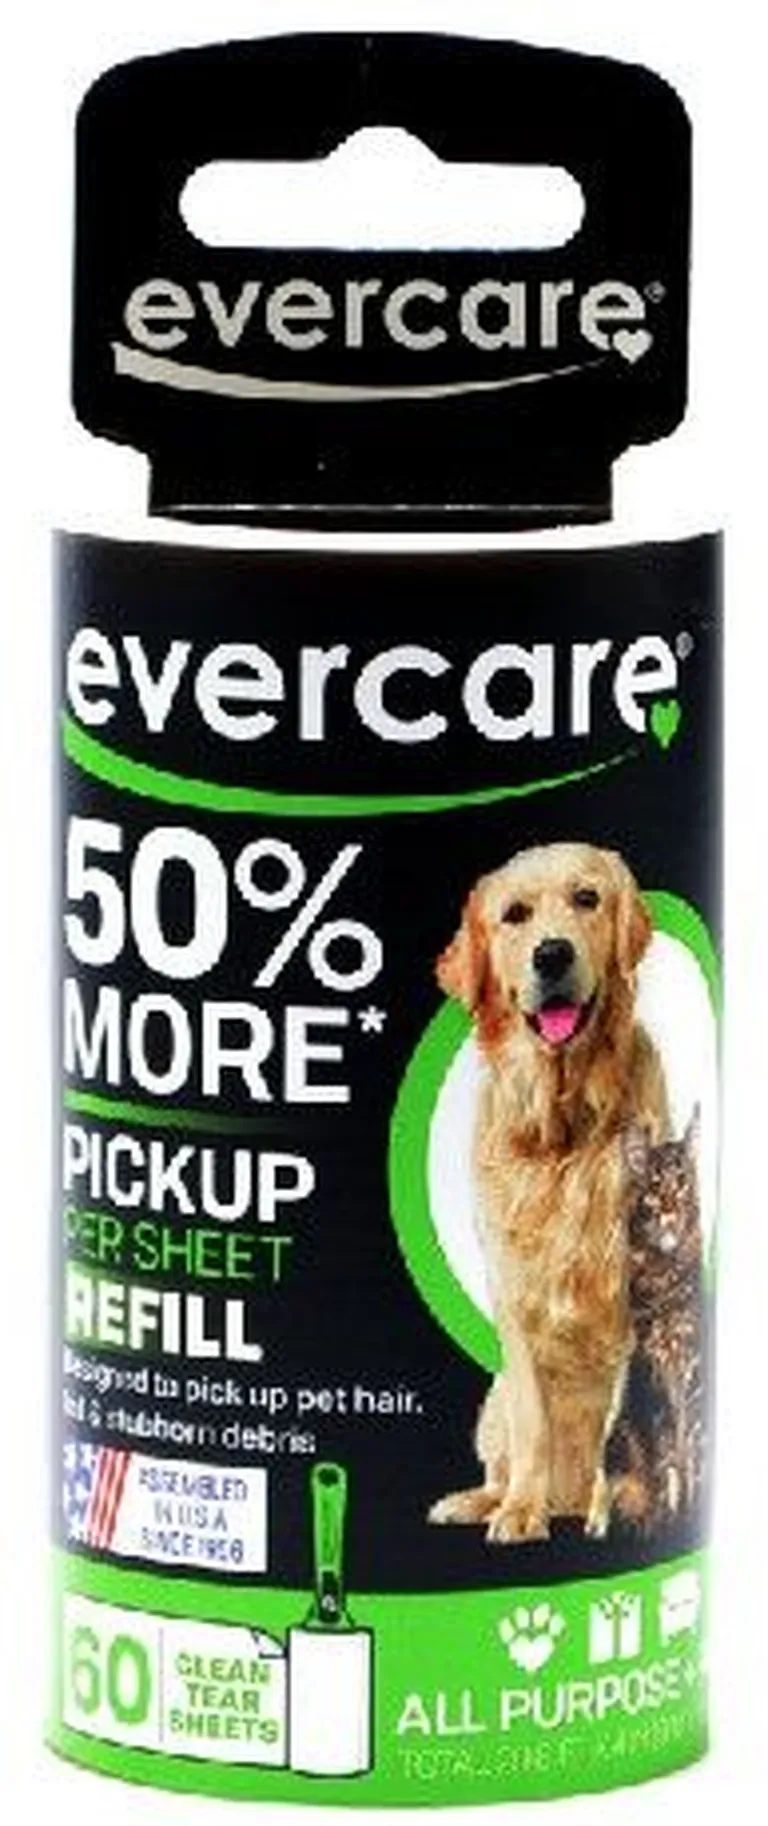 Evercare Lint Roller Extreme Stick Refill Photo 1